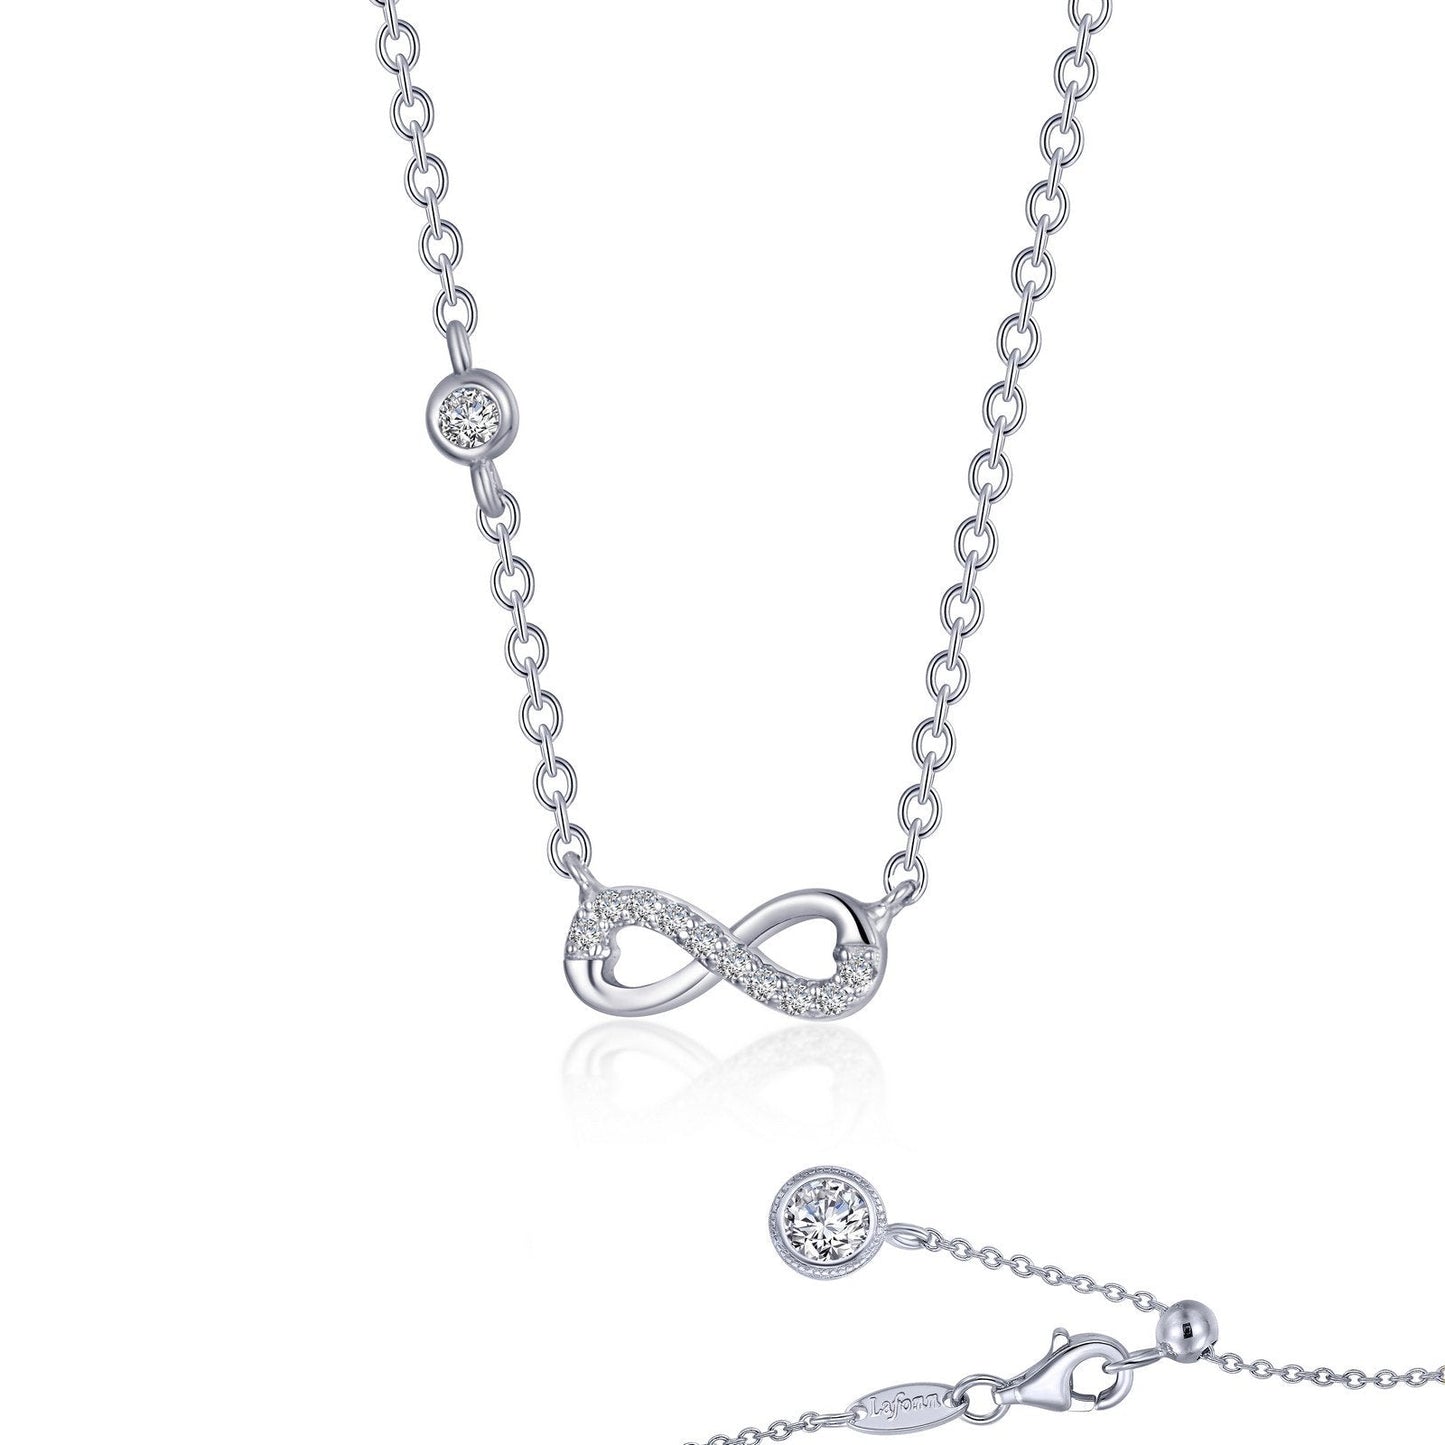 Lafonn 0.36 CTW Infinity Necklace Simulated Diamond NECKLACES Platinum 0.36 CTS Approx. 4.2mm (H) x 10.4mm (W)